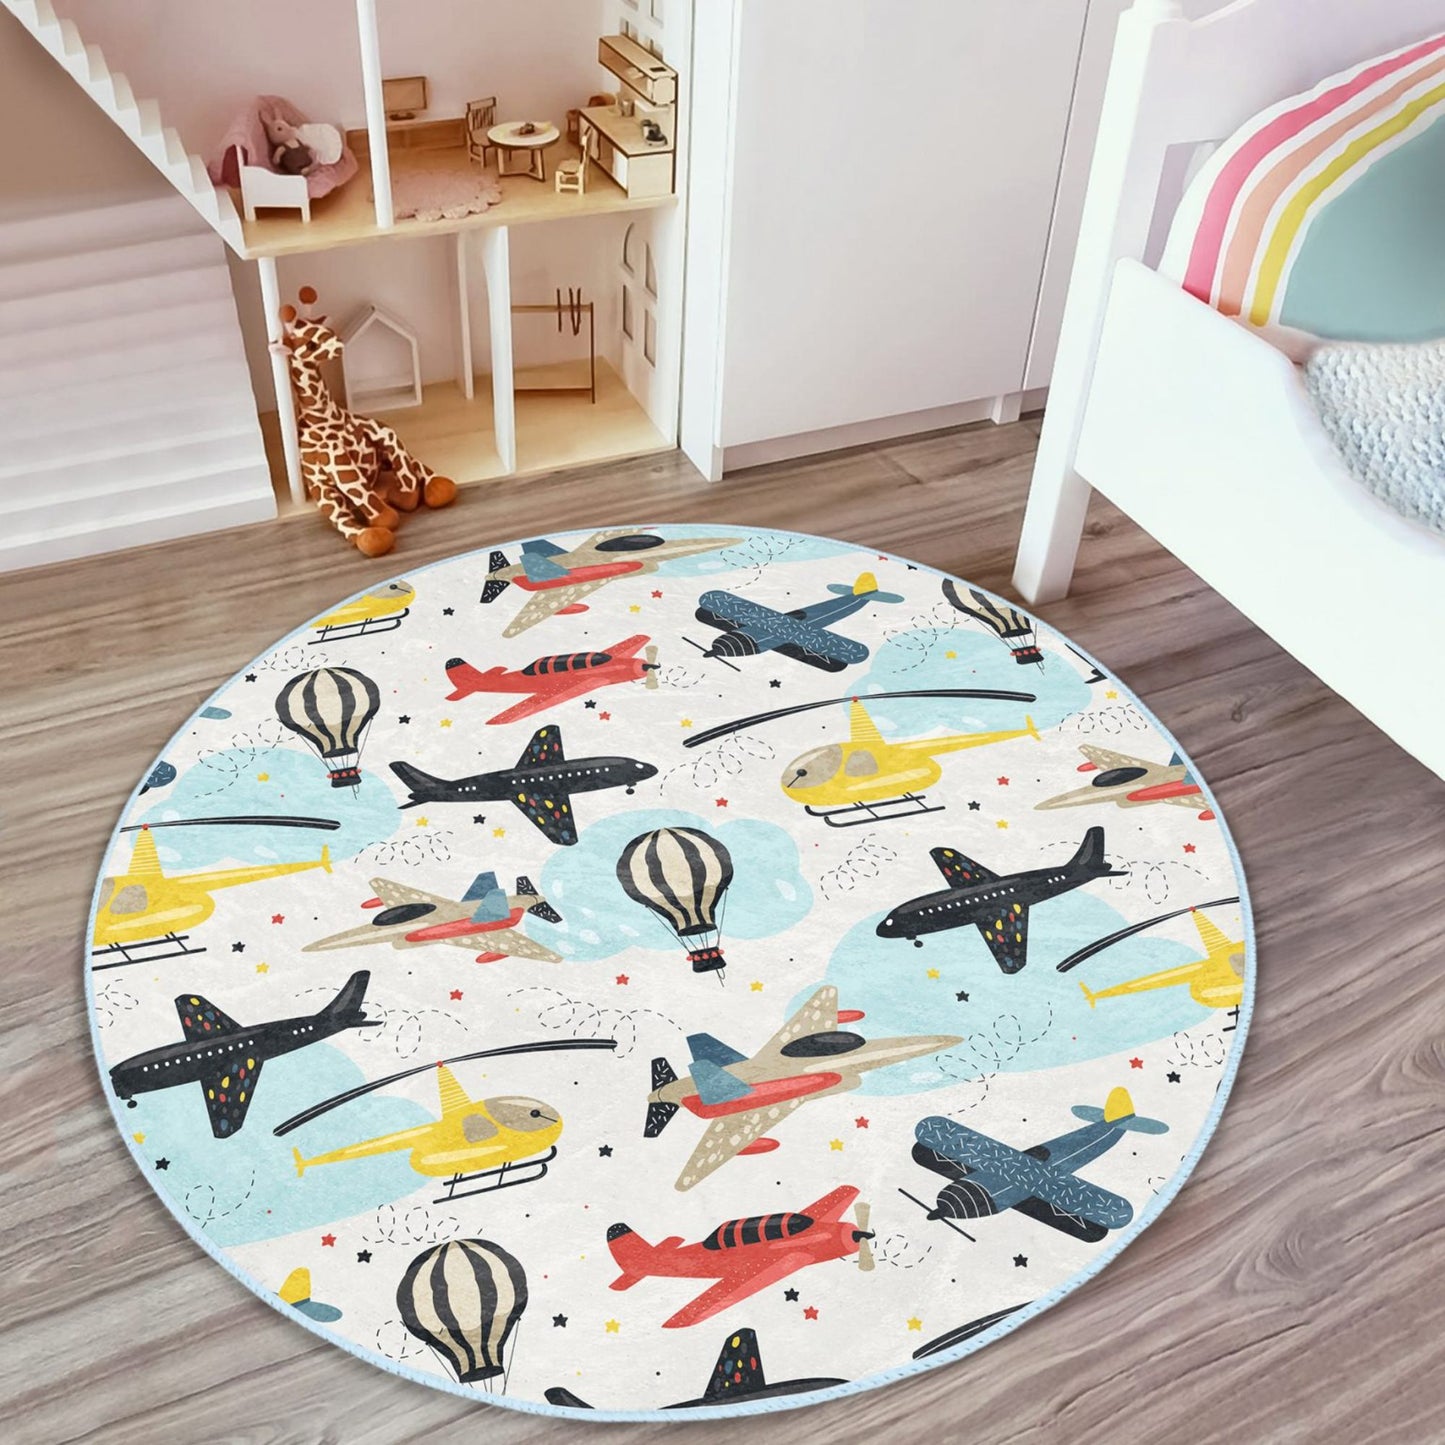 Rug with Aircraft Design for Kids' Play Area